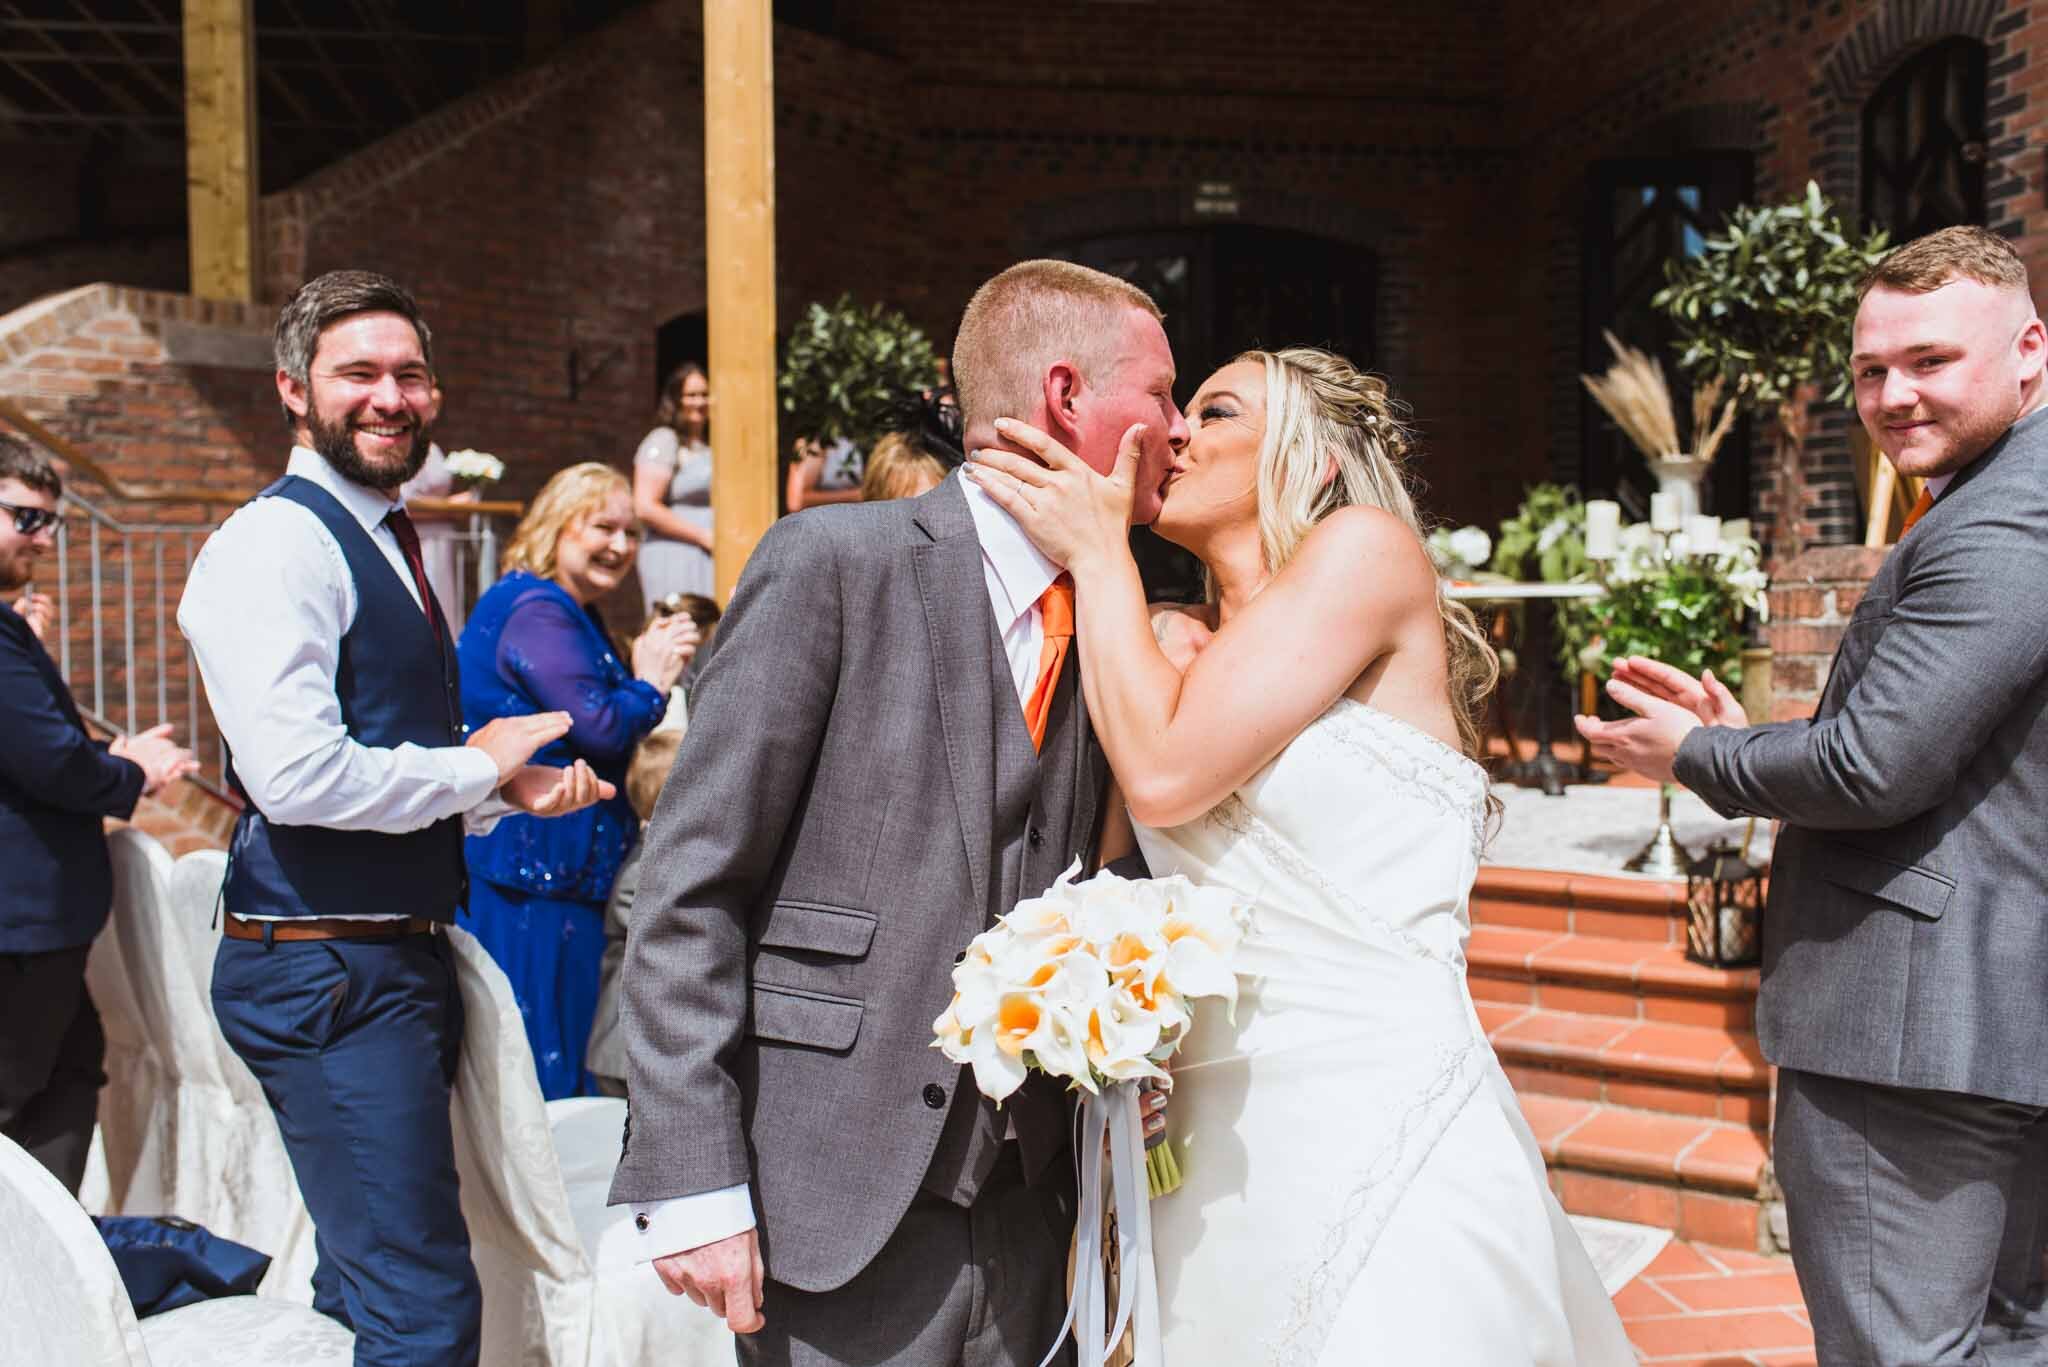  The bride and groom kiss at the end of the aisle with guests behind cheering and happy after the ceremony. 